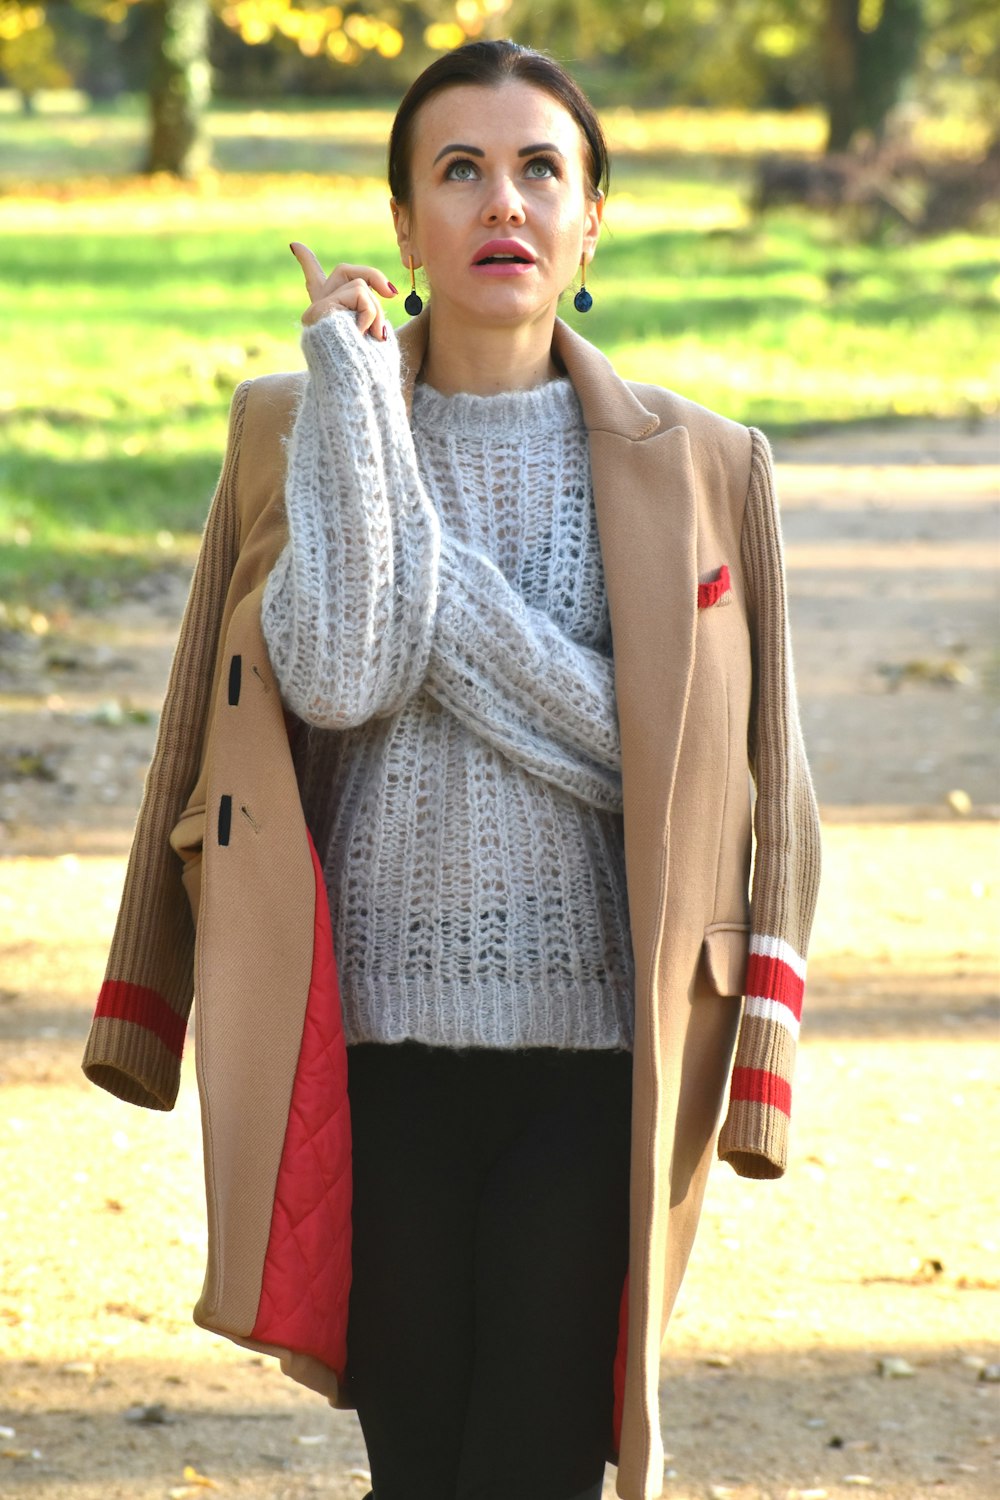 a woman in a coat and sweater is talking on a cell phone